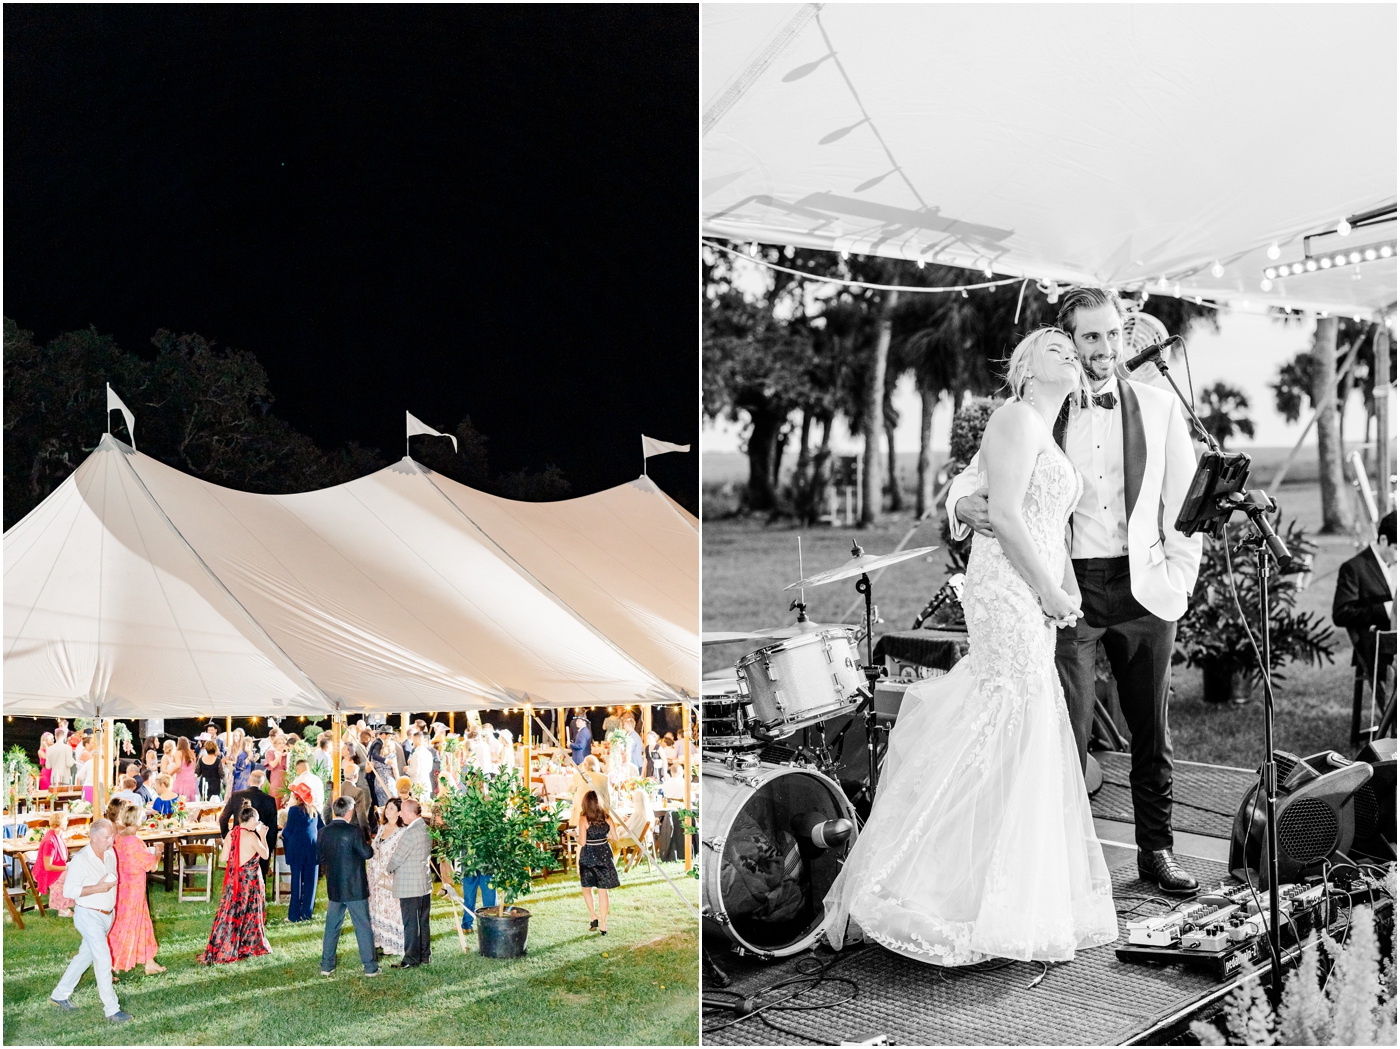 Bride & groom at their tented reception at Agapae Oaks wedding in Beaufort, SC